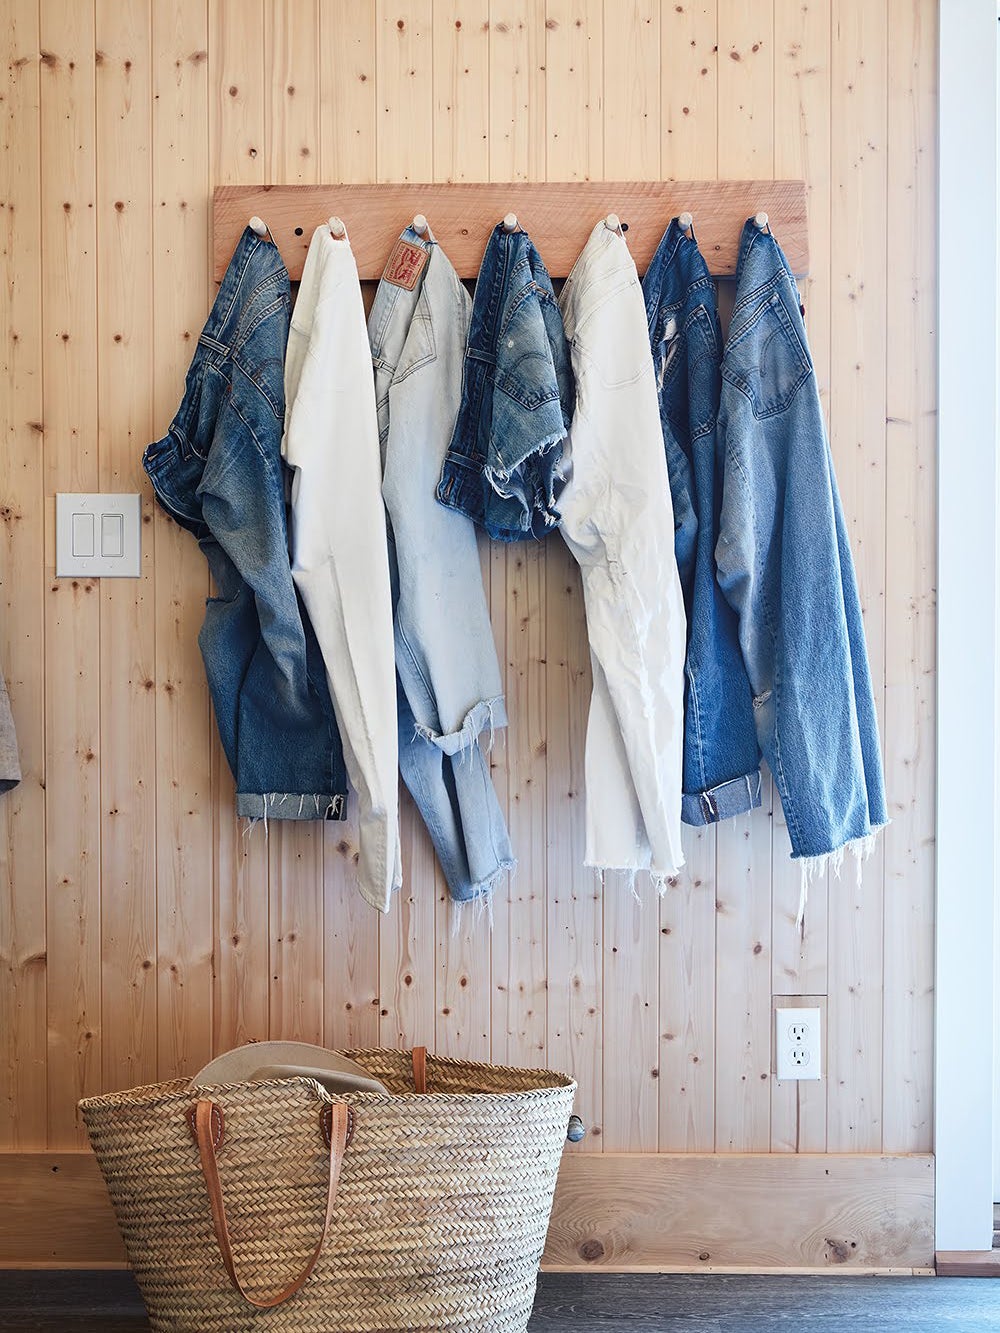 pairs of jeans hanging from a wall